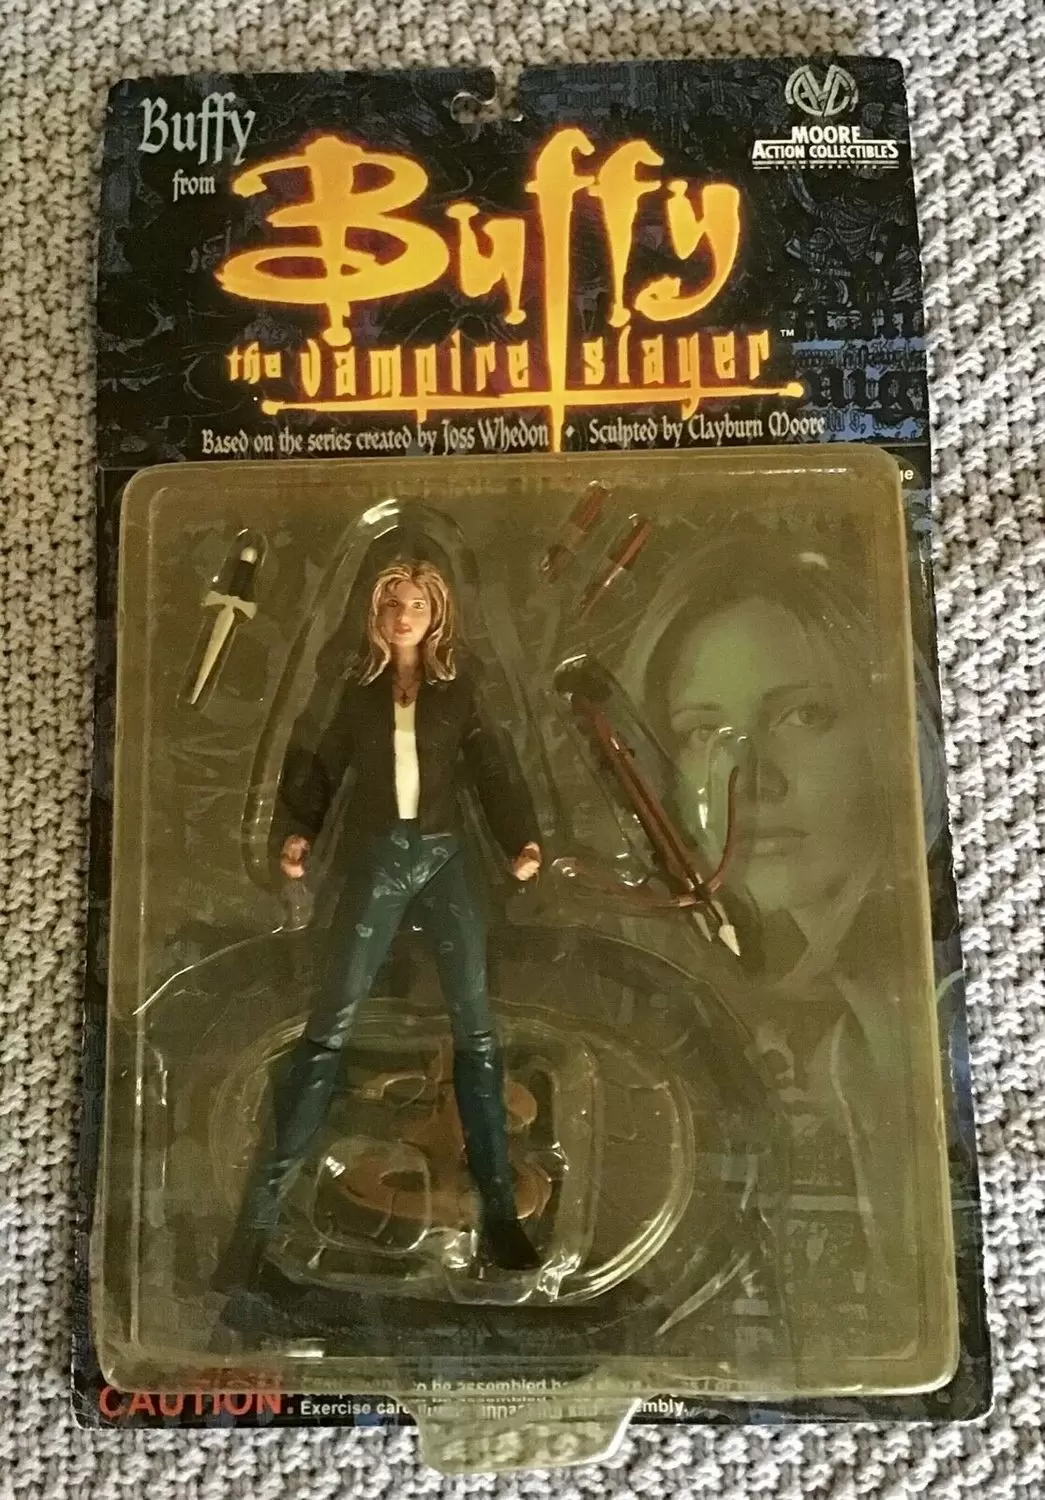 Moore Action Collectibles - Buffy